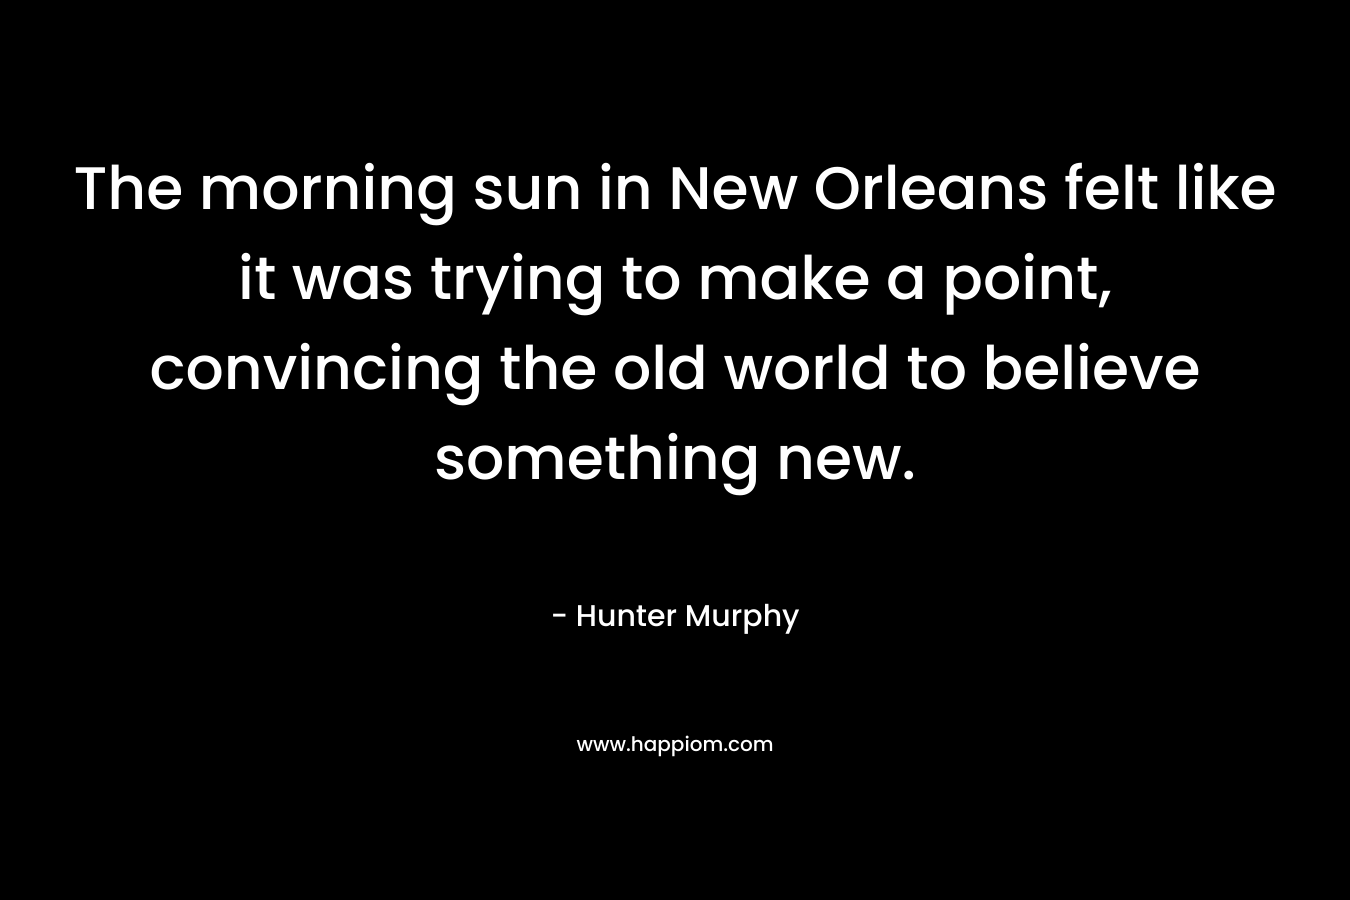 The morning sun in New Orleans felt like it was trying to make a point, convincing the old world to believe something new. – Hunter Murphy